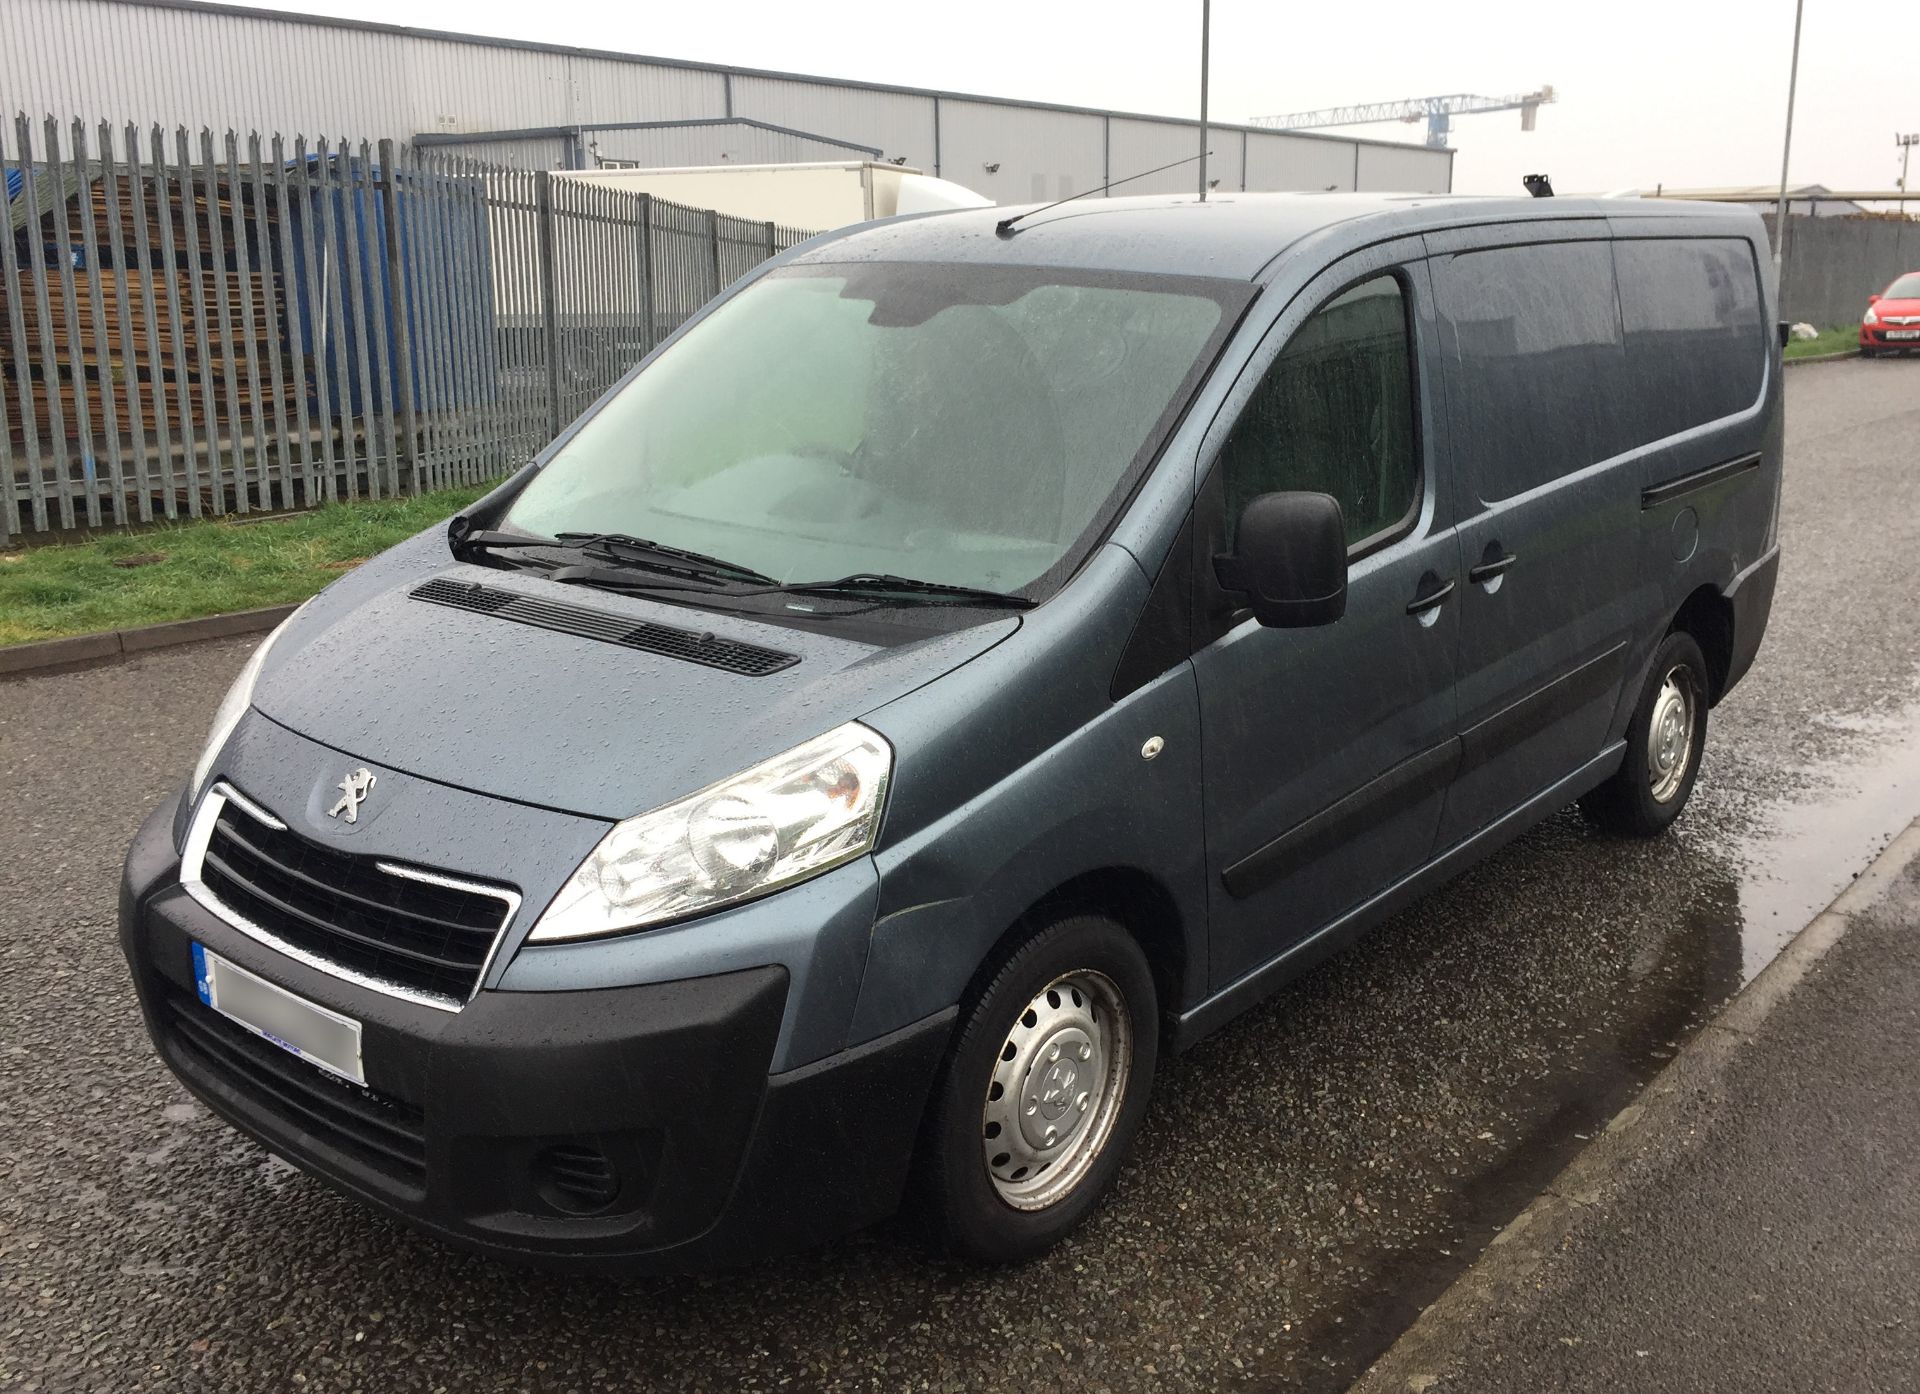 2012 Peugeot Expert 2.0 HDI 6 Speed HDi 130 L2H1 LWB 1200 Panel Van - CL505 - Location: Corby, - Image 5 of 10